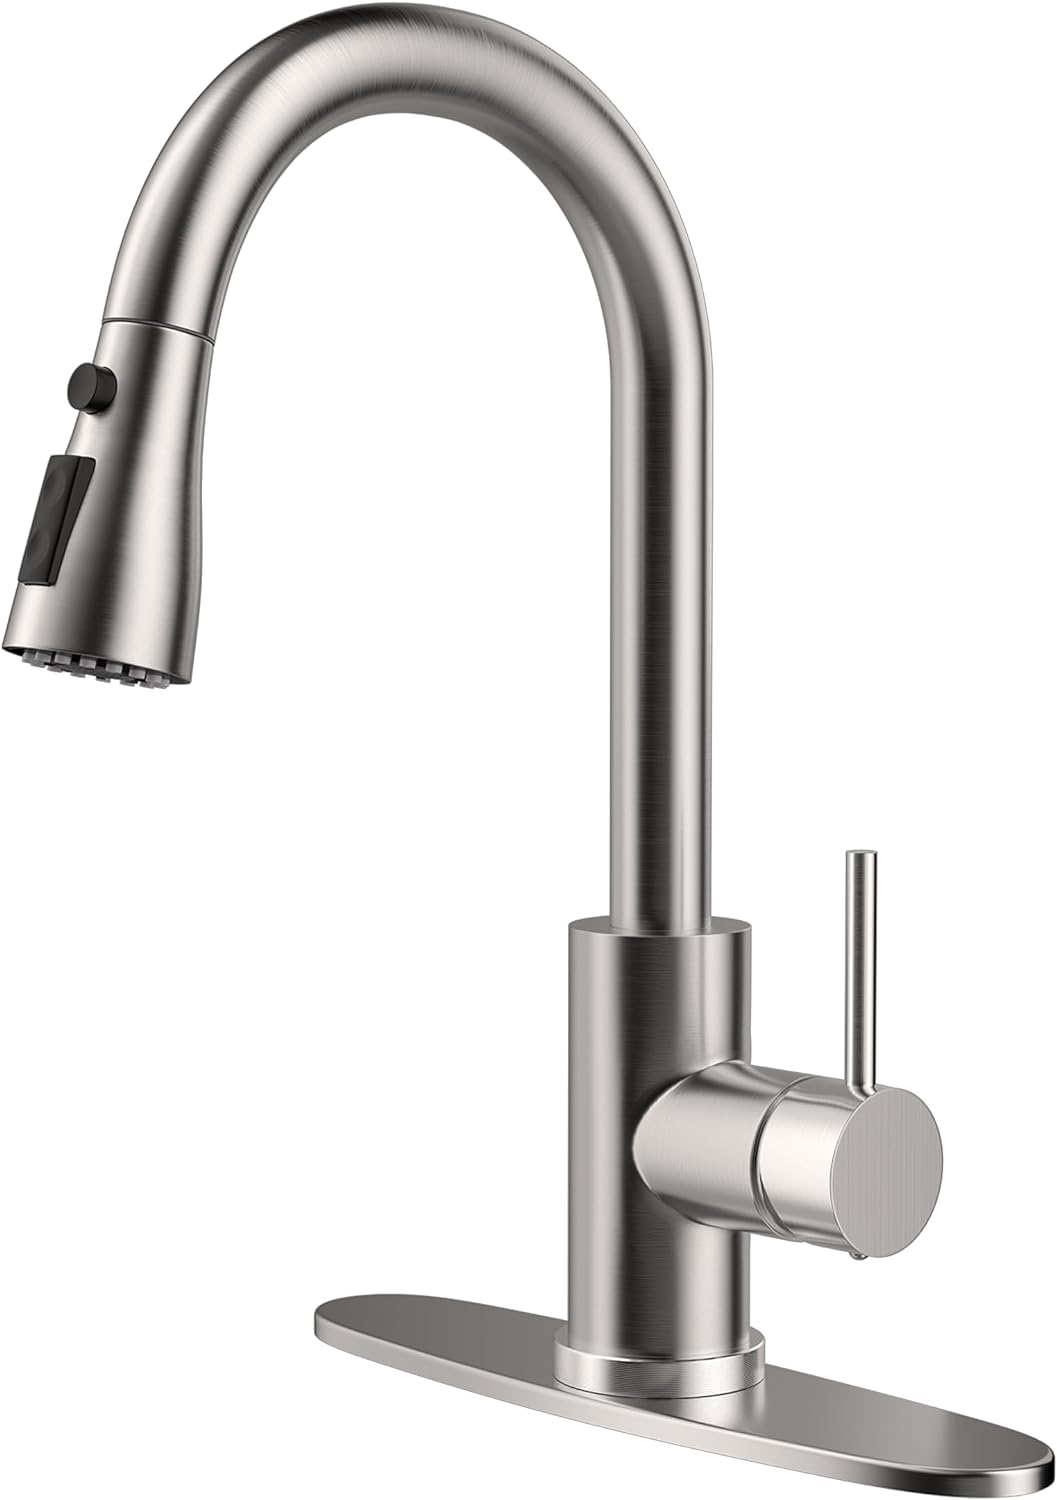 Single Handle High Arc Brushed Nickel Pull Out Kitchen Faucet, Single Level Stainless Steel Kitchen Sink Faucet with Pull Down Sprayer and 10 Inch Deck (Brushed Nickel)